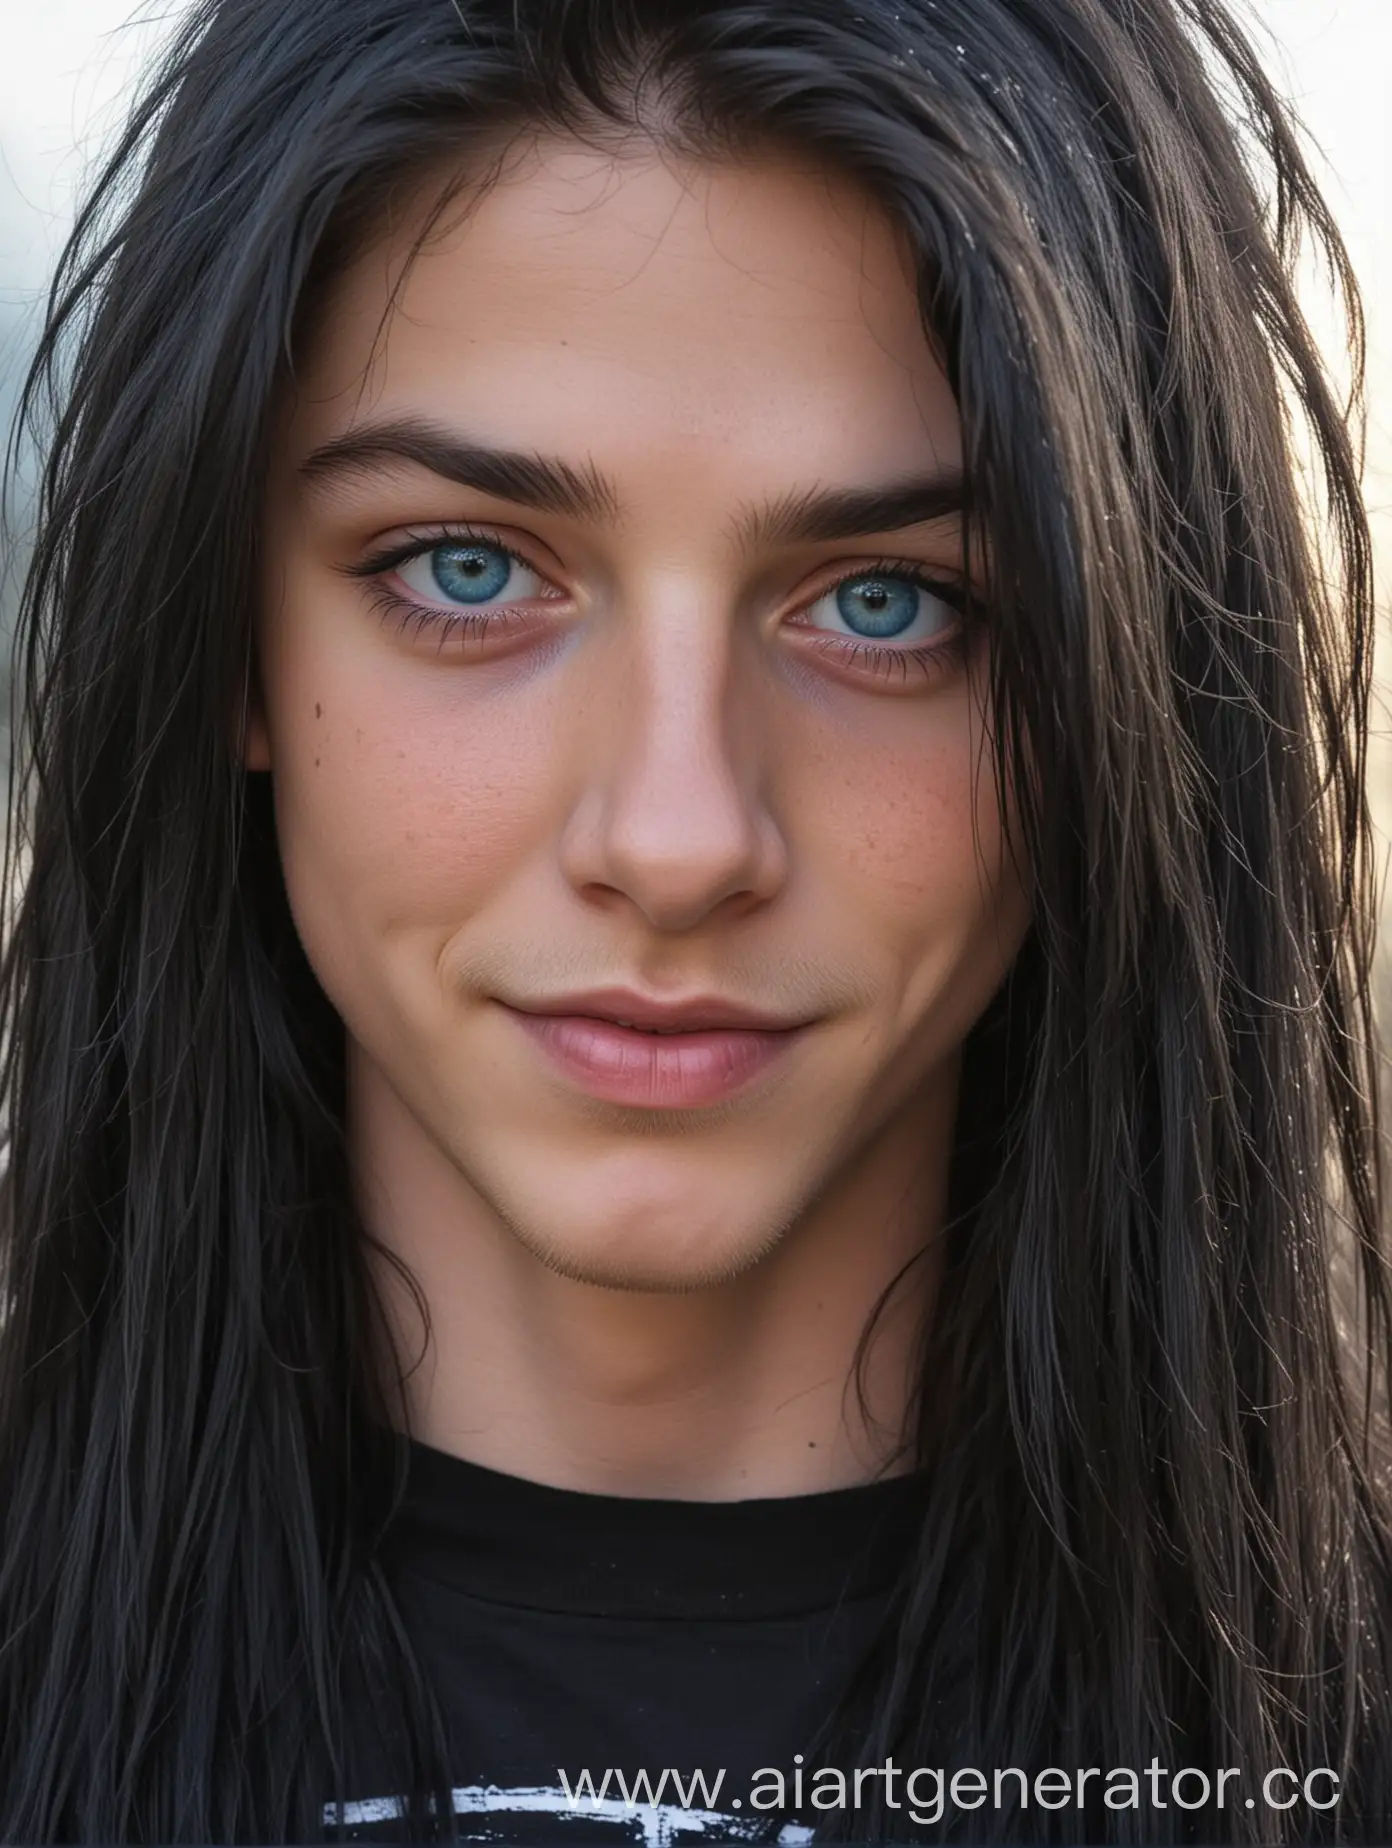 Metalhead-Teen-Boy-with-Soft-Facial-Features-and-Blue-Eyes